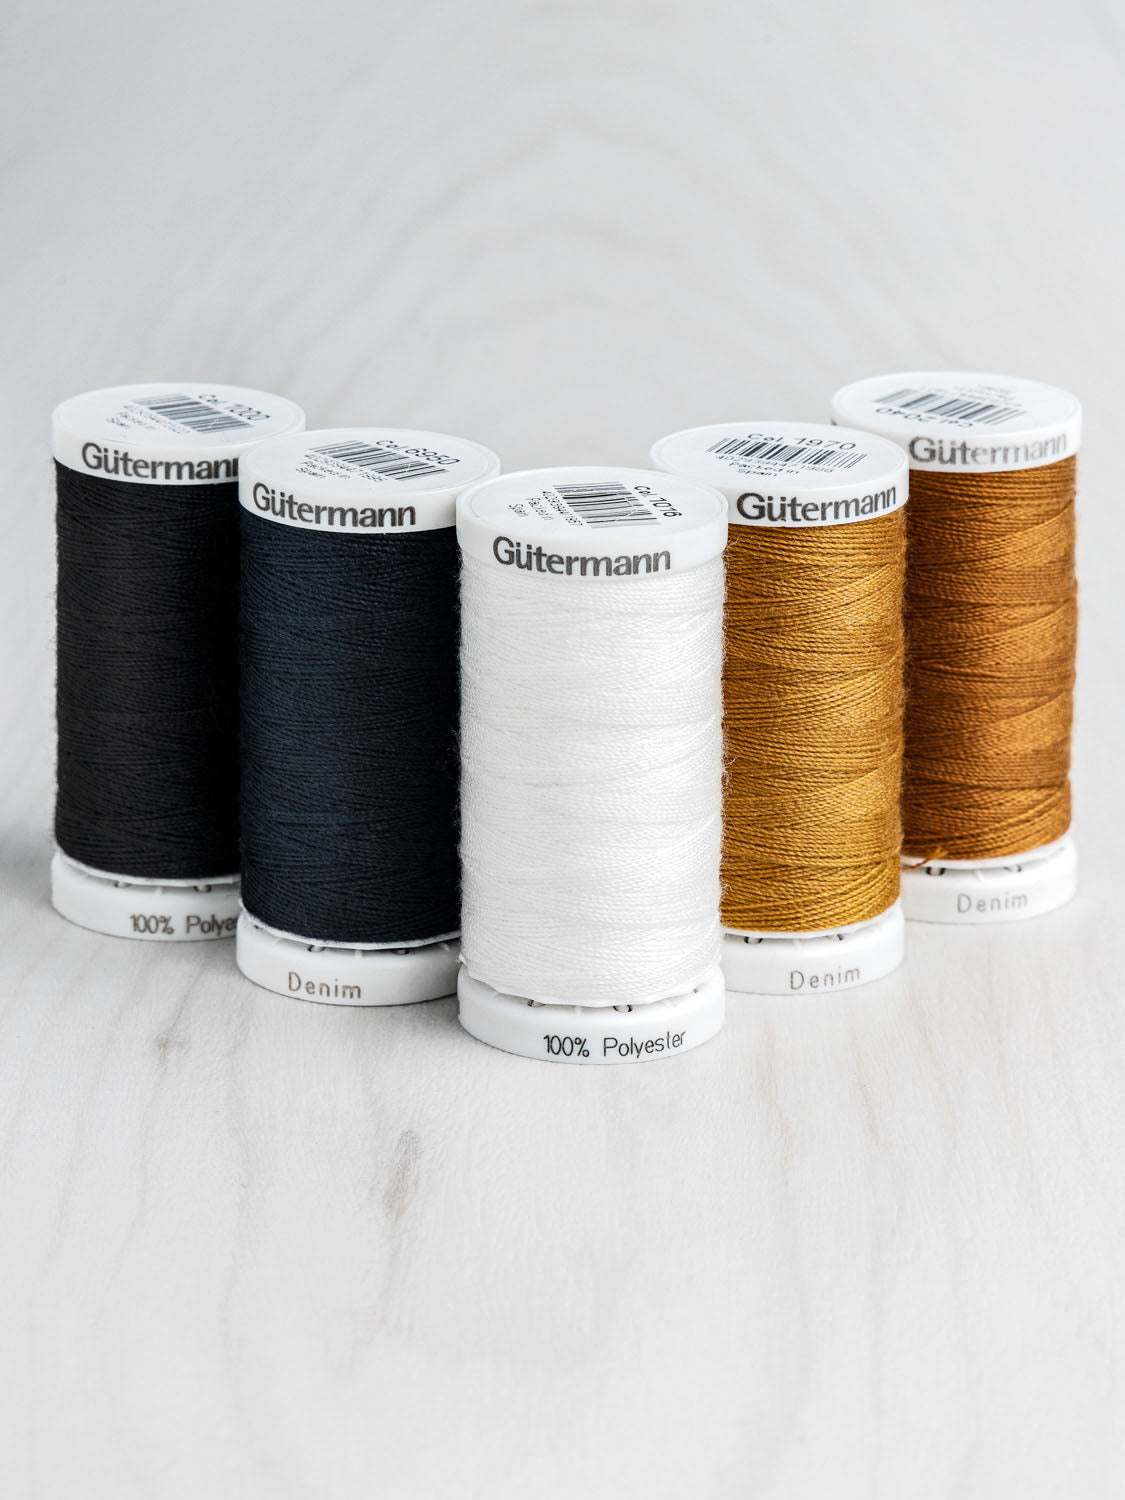 Jeans Thread 100 Yards-Gold